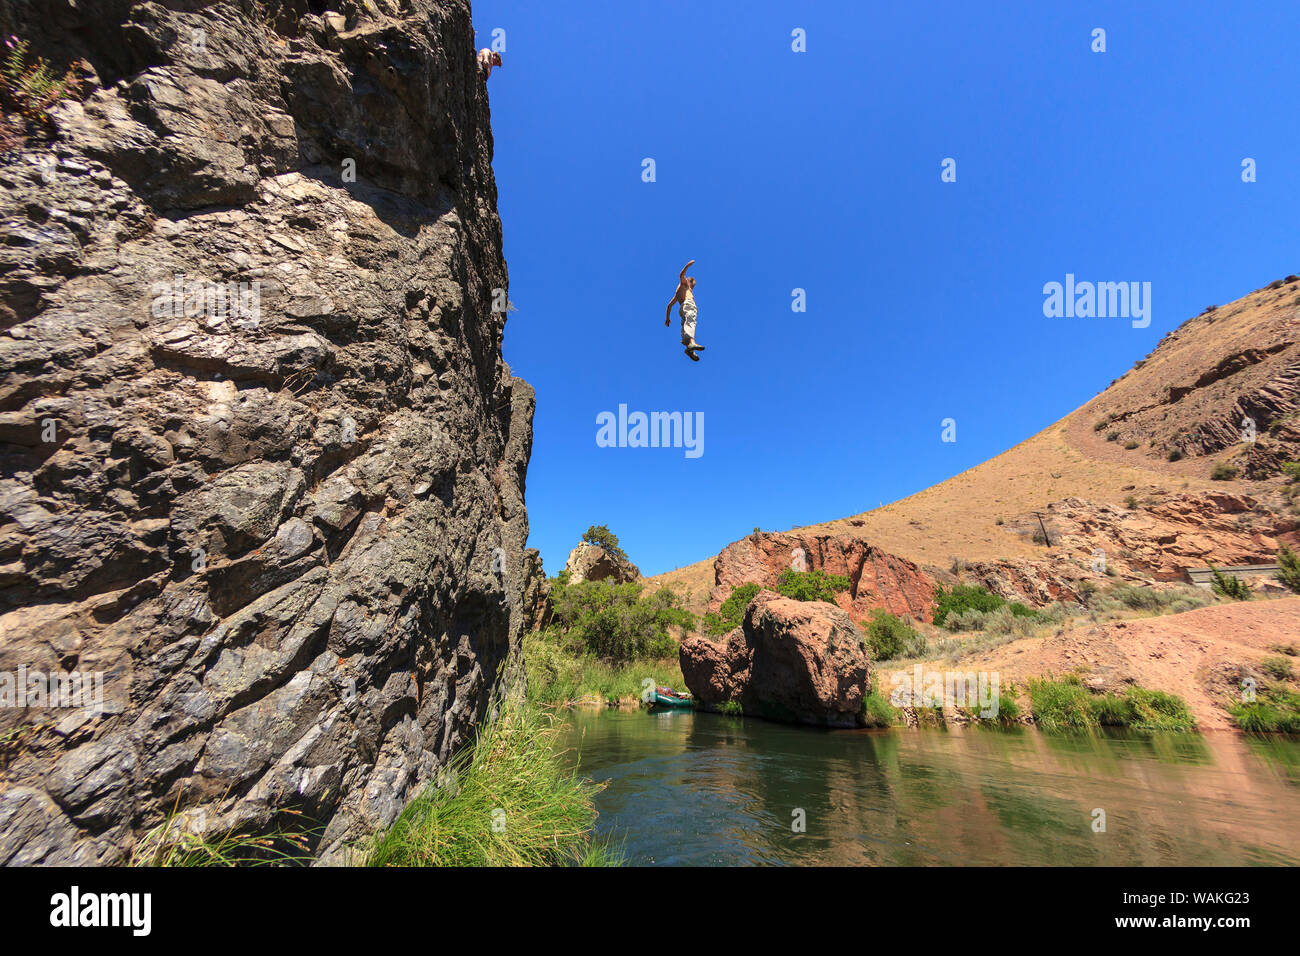 Cliff jumping near Warm Springs Road, Lower Deschutes River, Central Oregon, USA (MR) Stock Photo